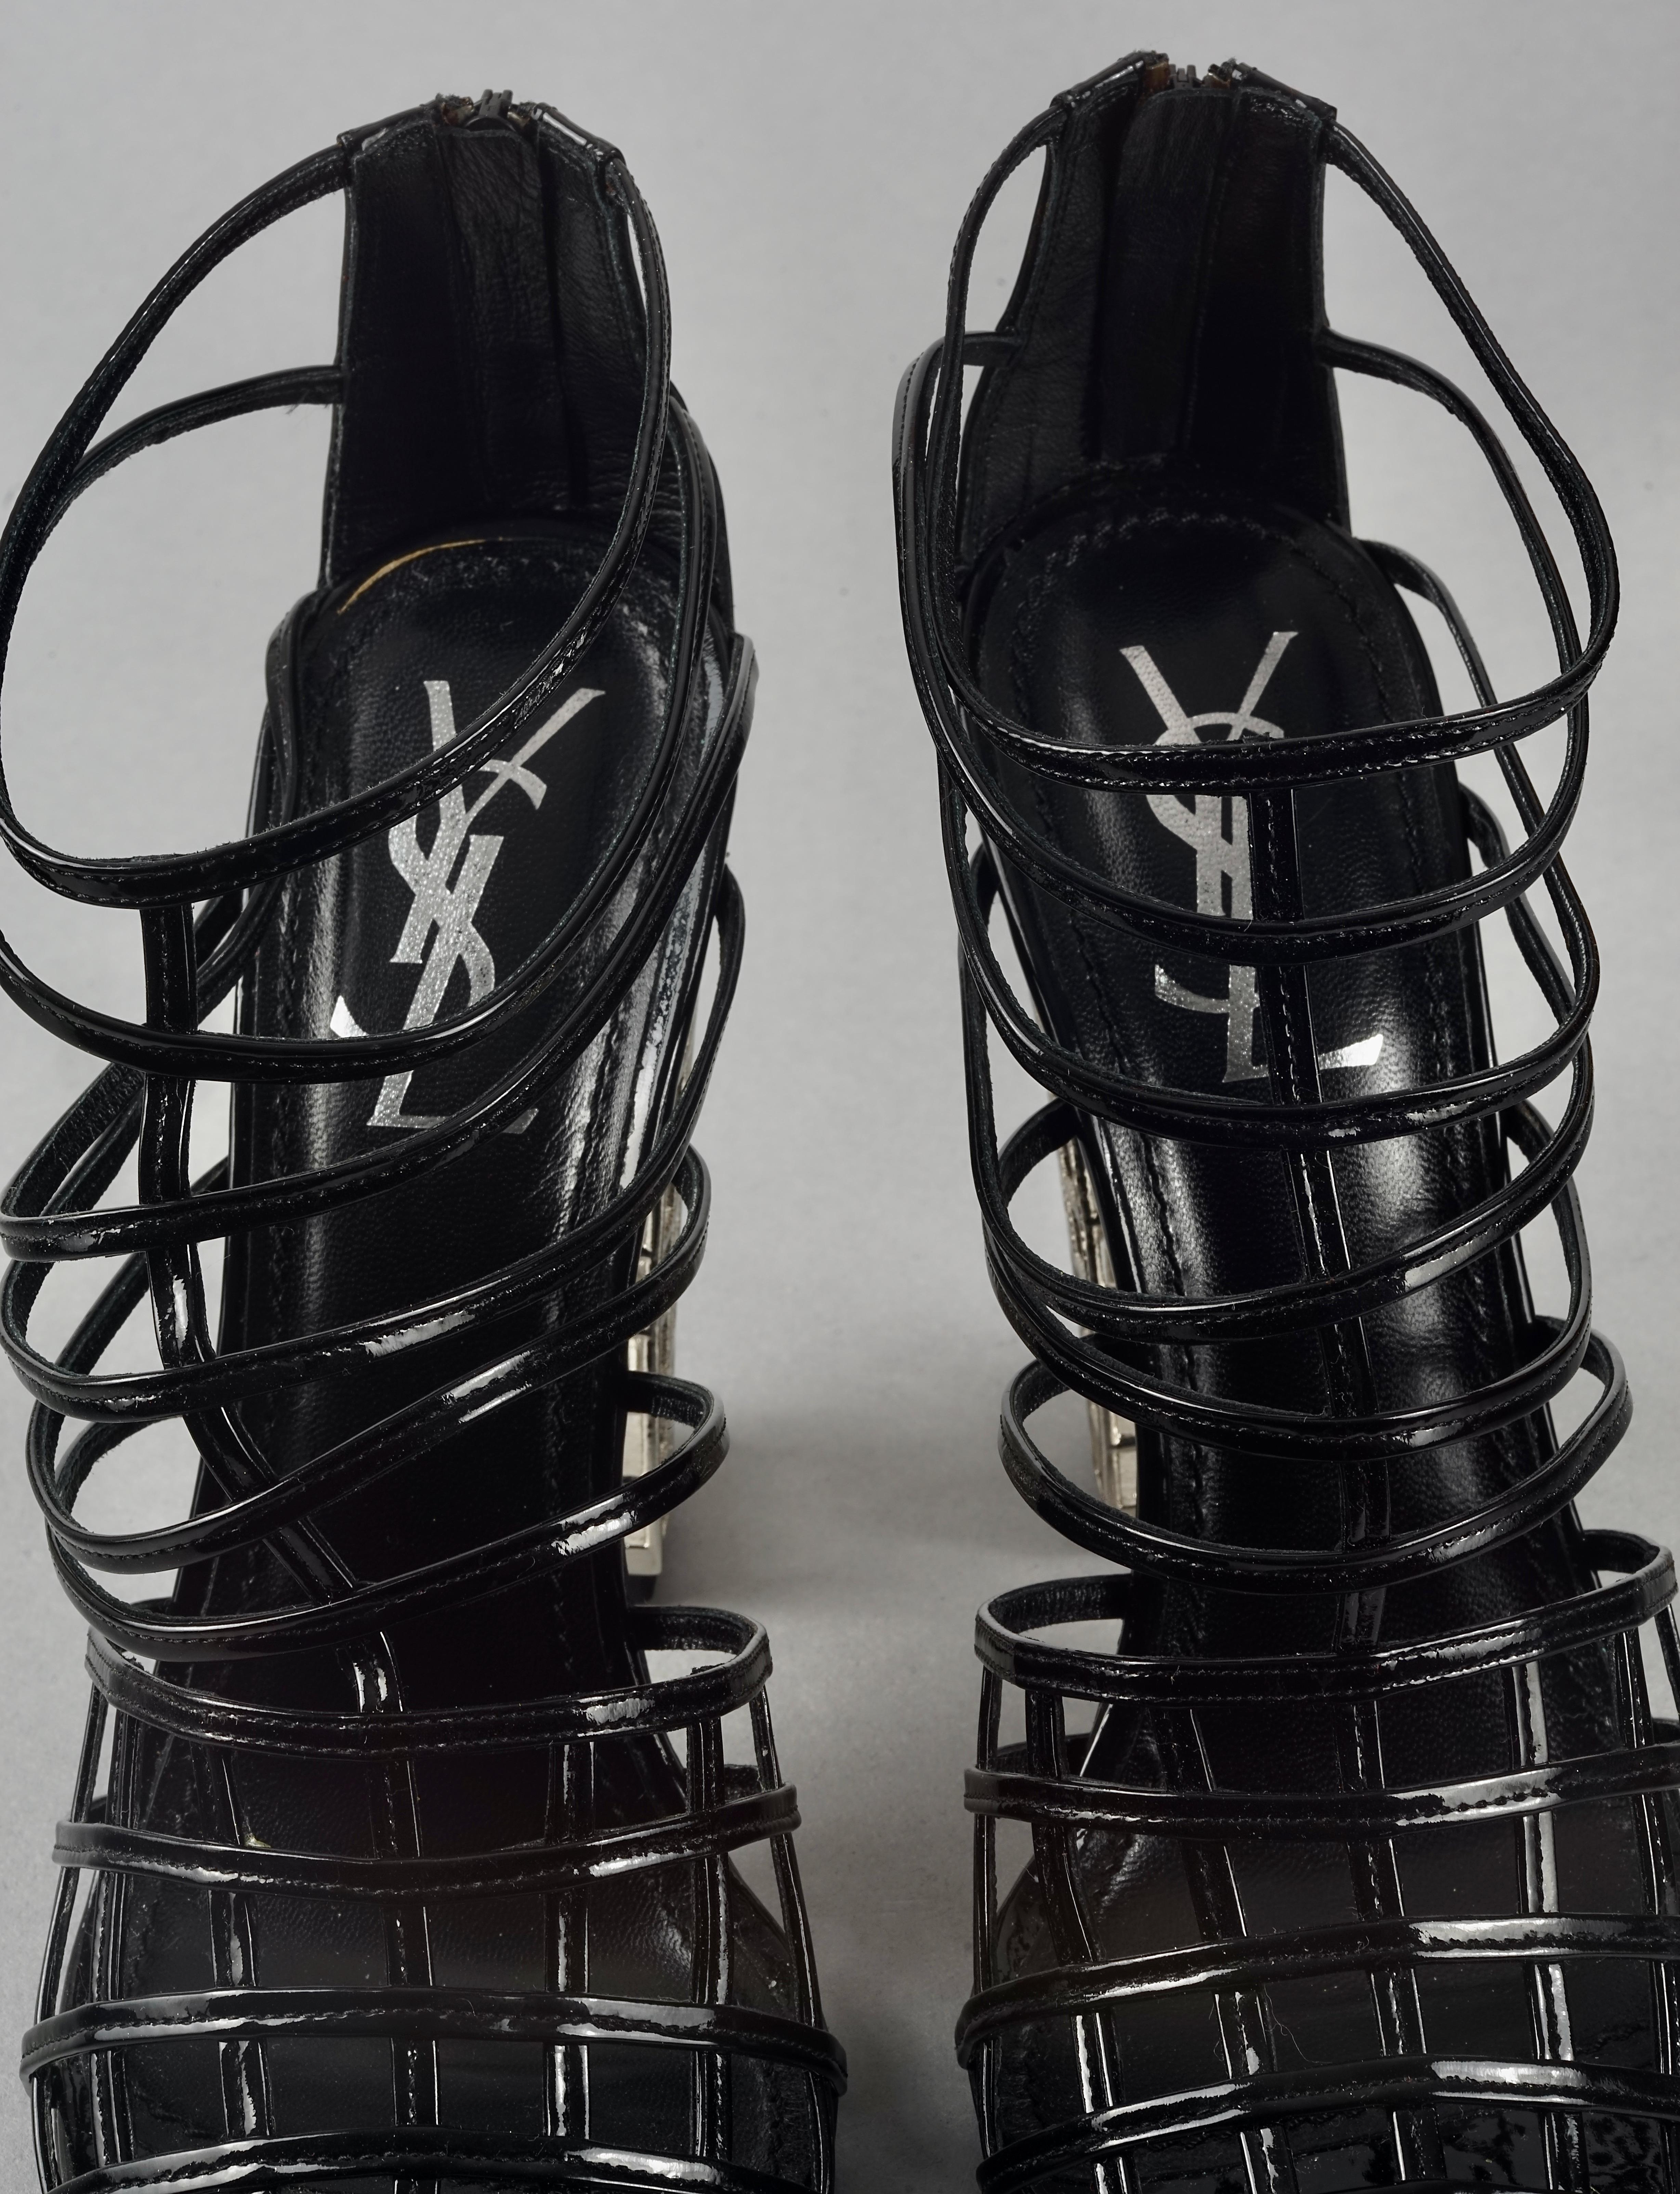 S/S2009 YVES SAINT LAURENT Ysl Cage Heel Ankle Boots For Sale 3